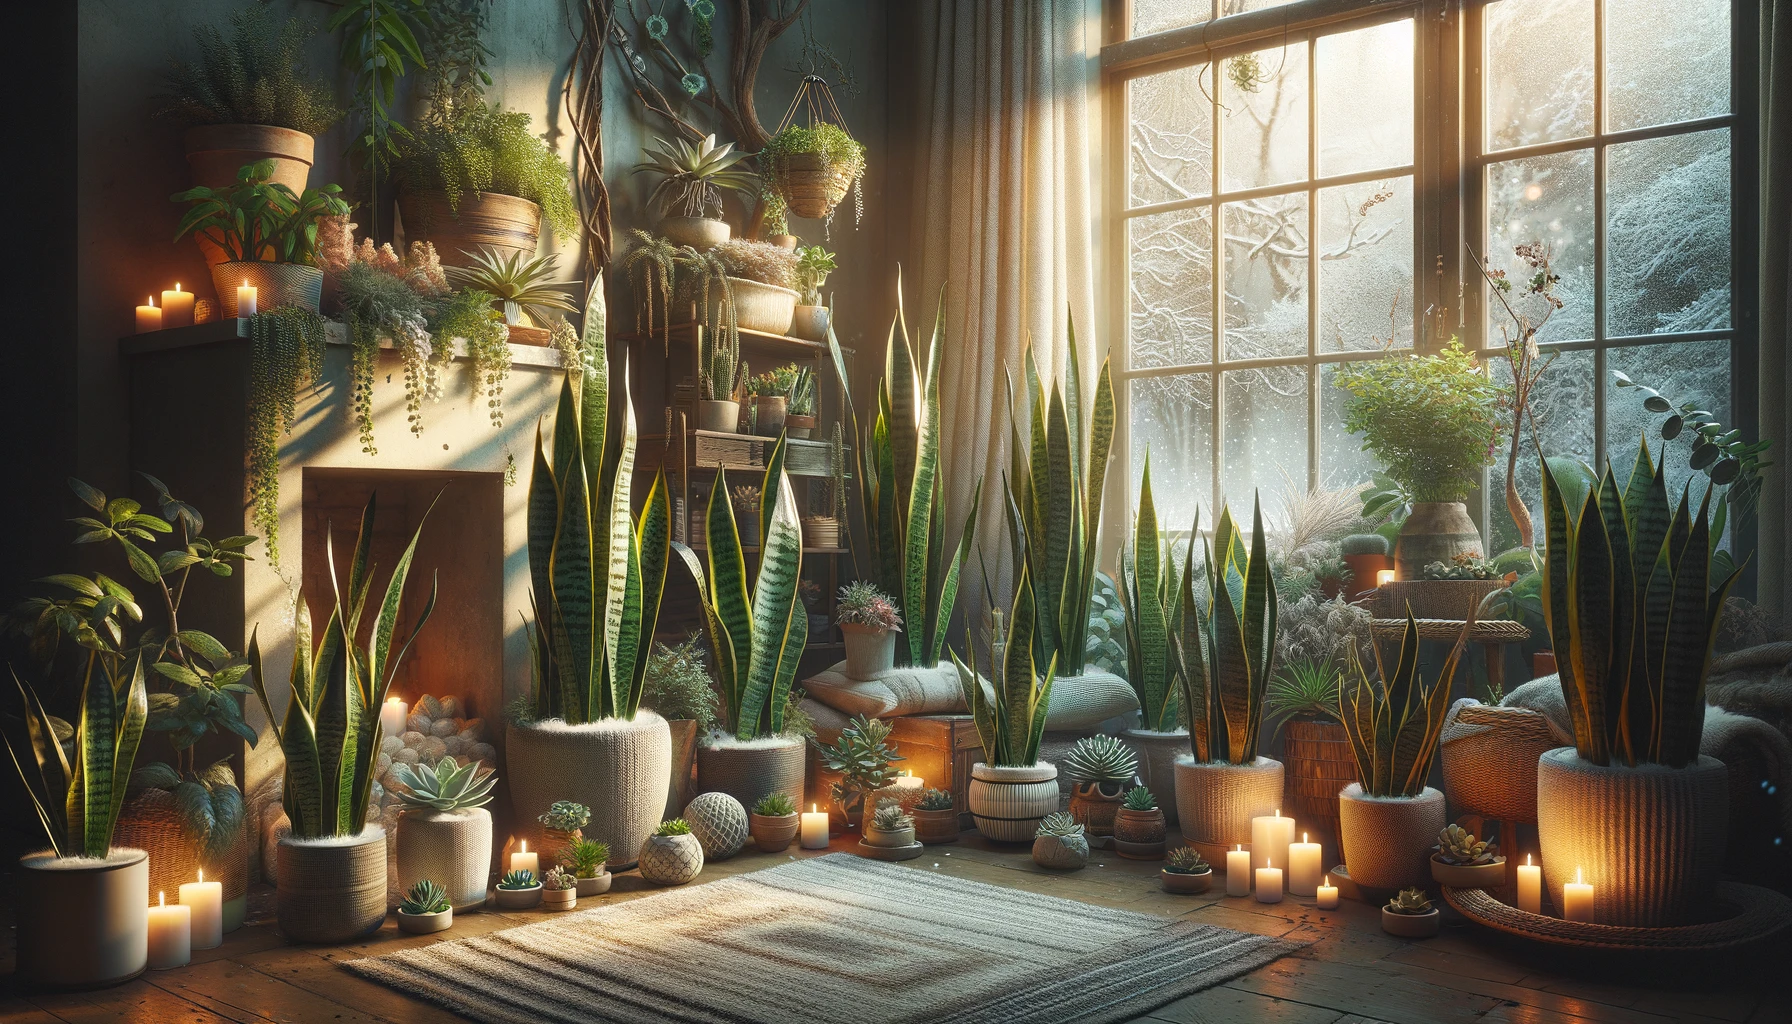 Indoor garden scene with a collection of snake plants and other succulents arranged for overwintering. The plants are strategically placed in a cozy, well-lit indoor space to maximize warmth and light exposure during the colder months, highlighting the tranquility and careful care of these resilient plants